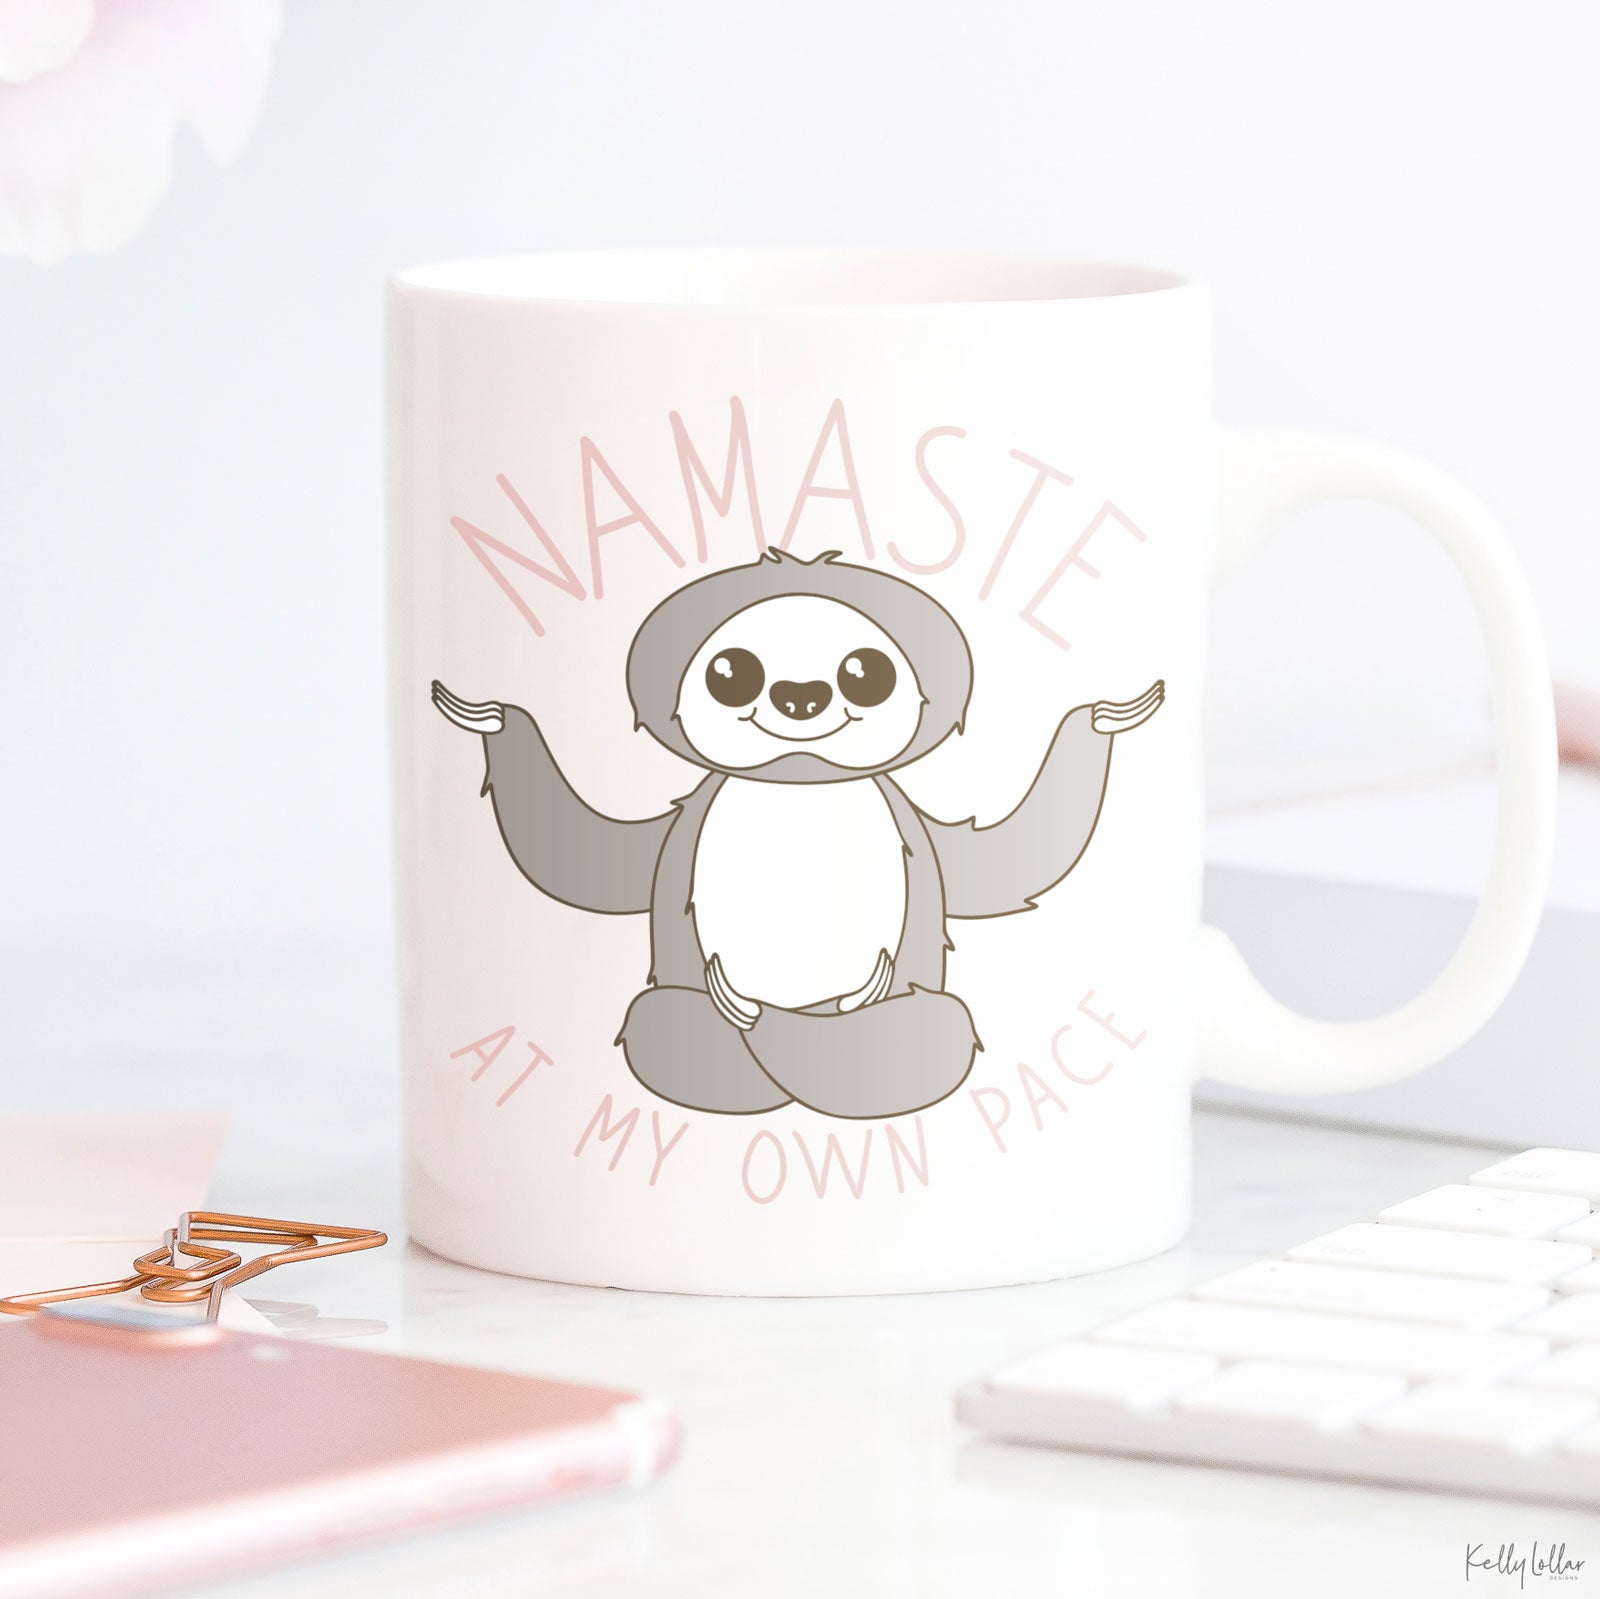 Freebie Friday | Namaste at My Own Pace Kawaii Sloth Cut Files | SVG DXF EPS PNG